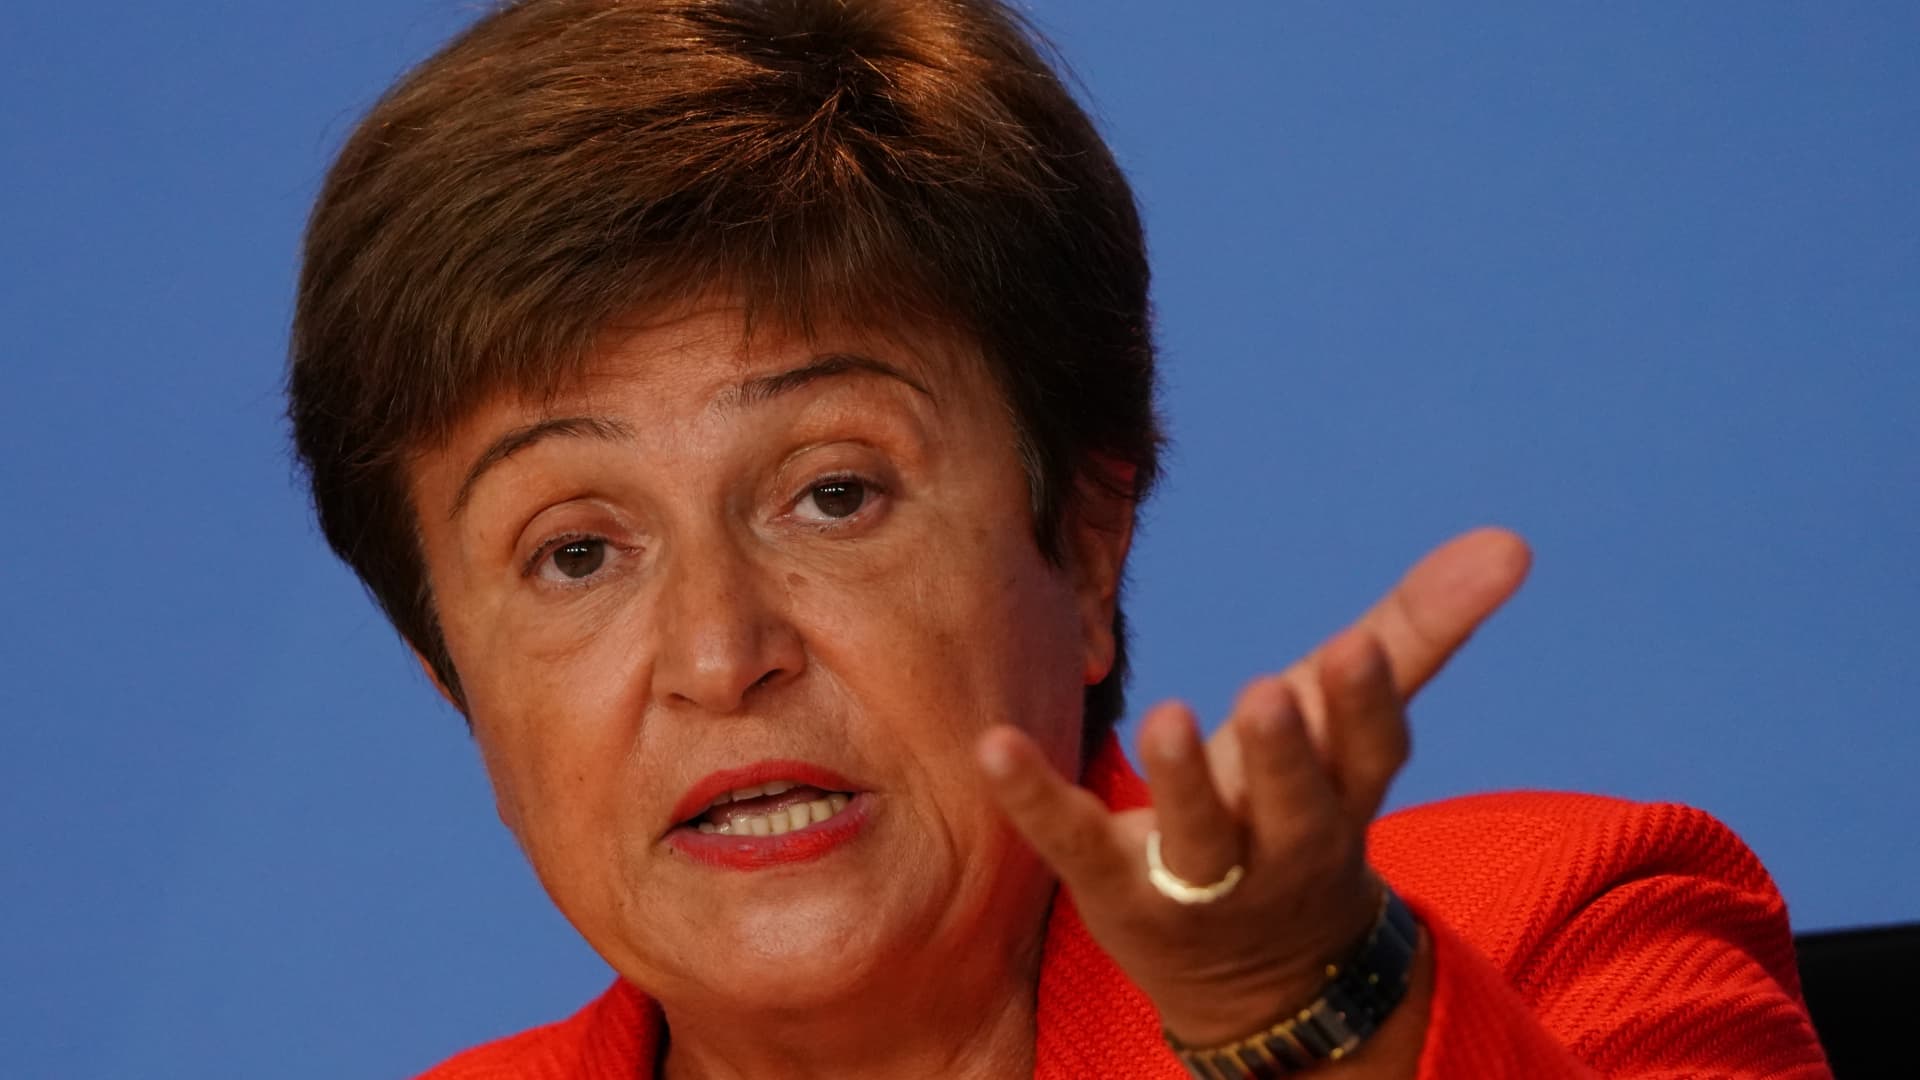 Managing Director of the International Monetary Fund (IMF) Kristalina Georgieva speaks during a press conference as she meets with economic and financial organizations in Berlin at the German chancellery on August 26, 2021 in Berlin, Germany.